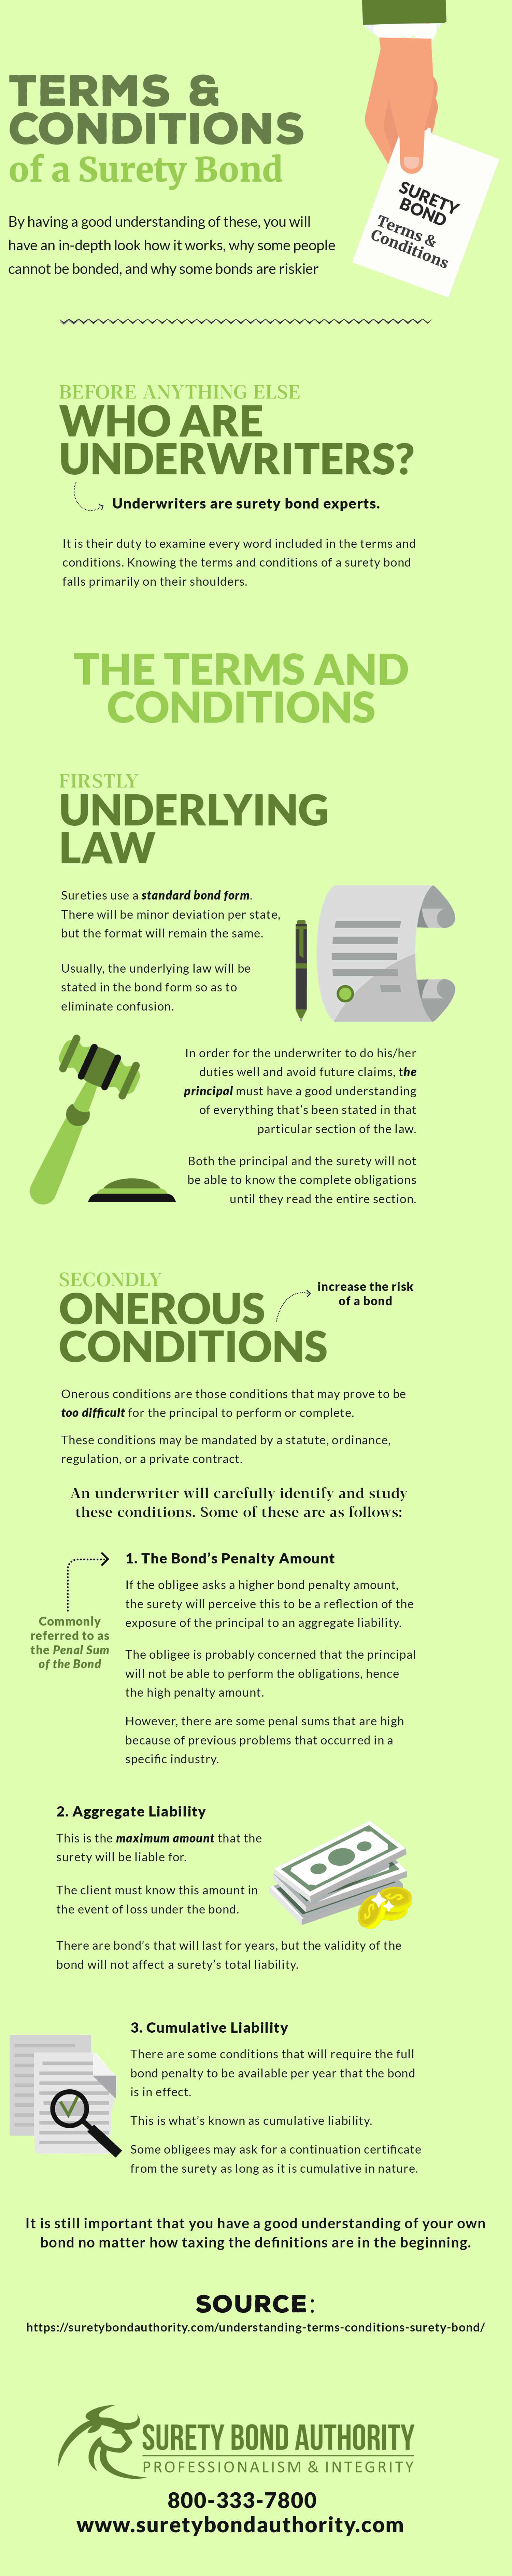 Terms and Conditions of a Surety Bond Infographic